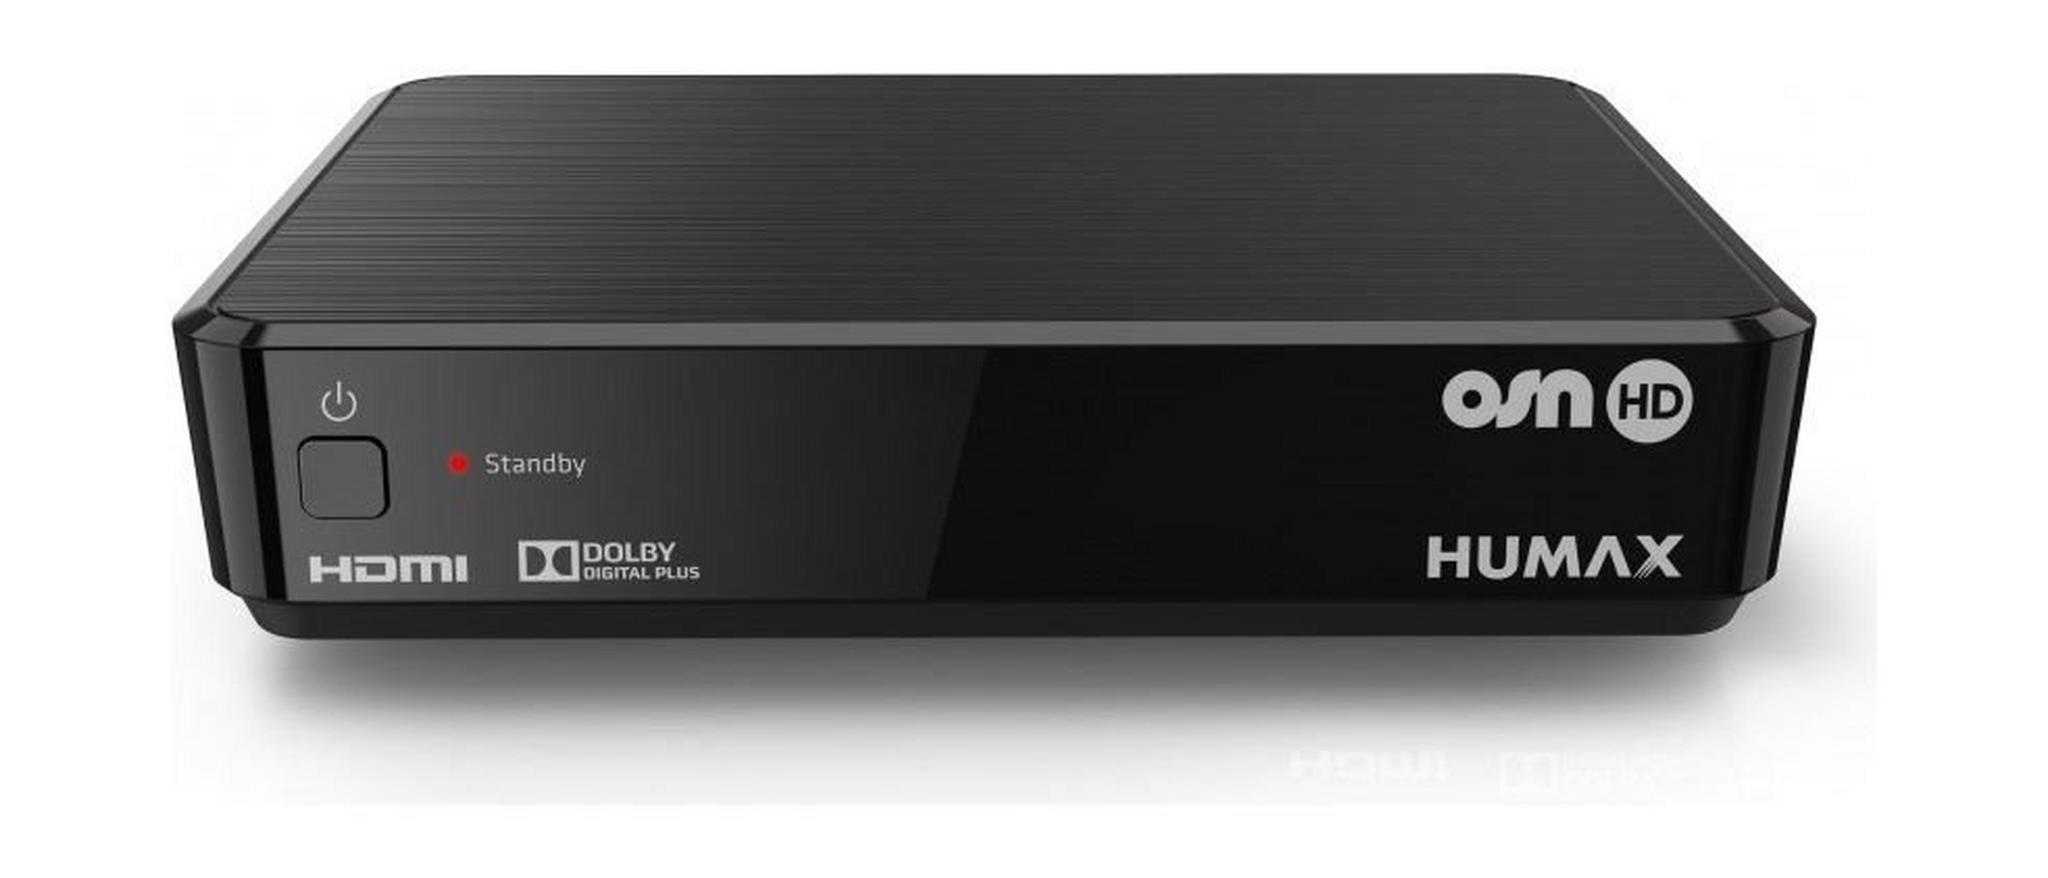 Humax High Definition Free-to-Air Satellite Receiver with FREE 2 Month Subscription to OSN